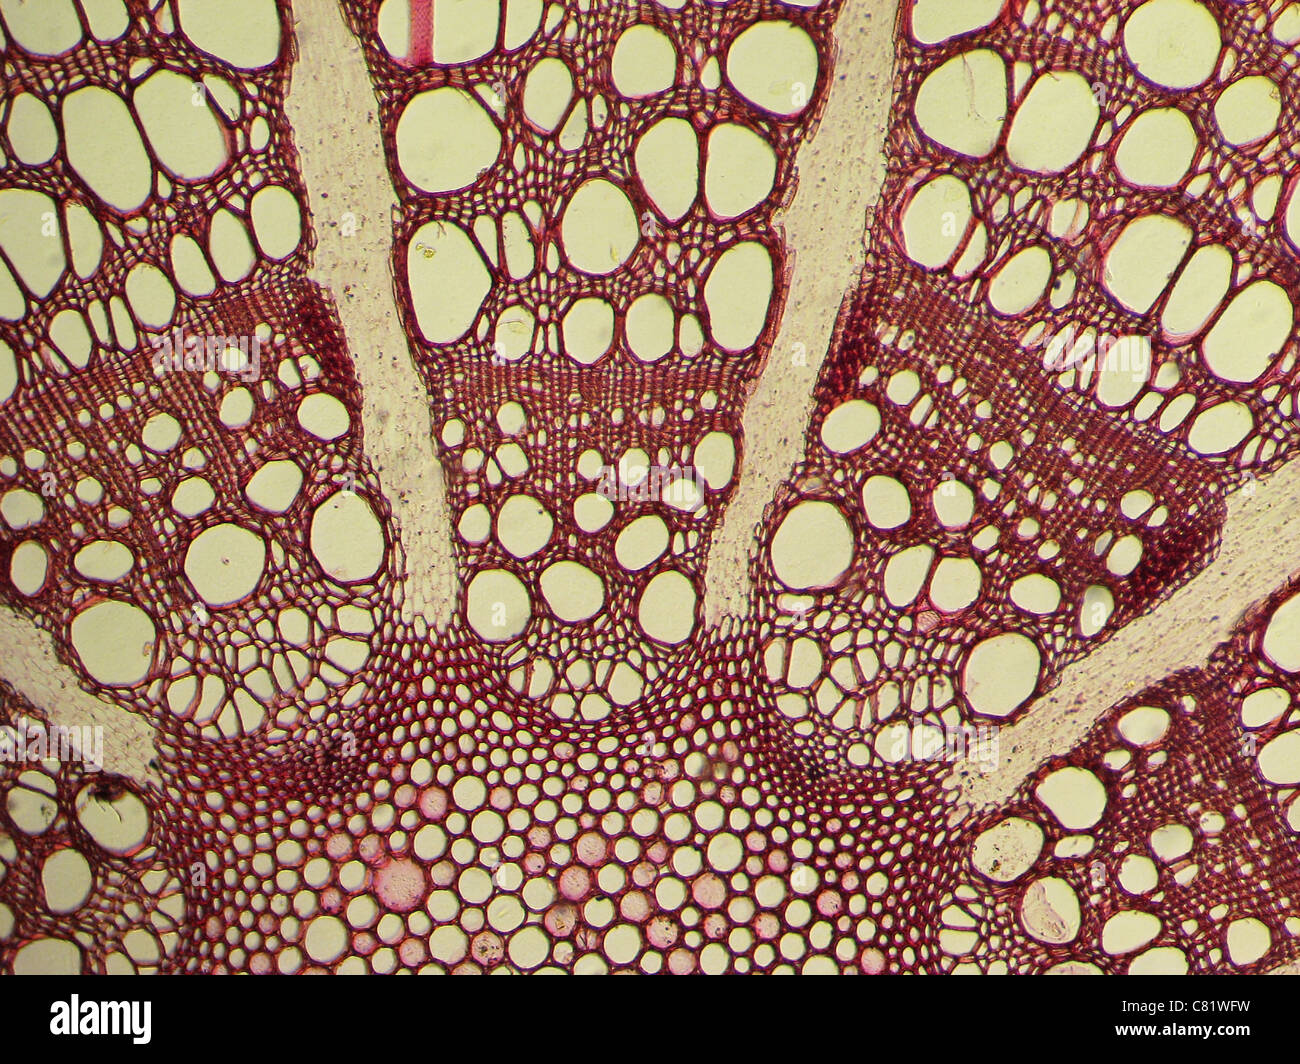 microphotograph of stained clematis stem cross section taken through a microscope Stock Photo